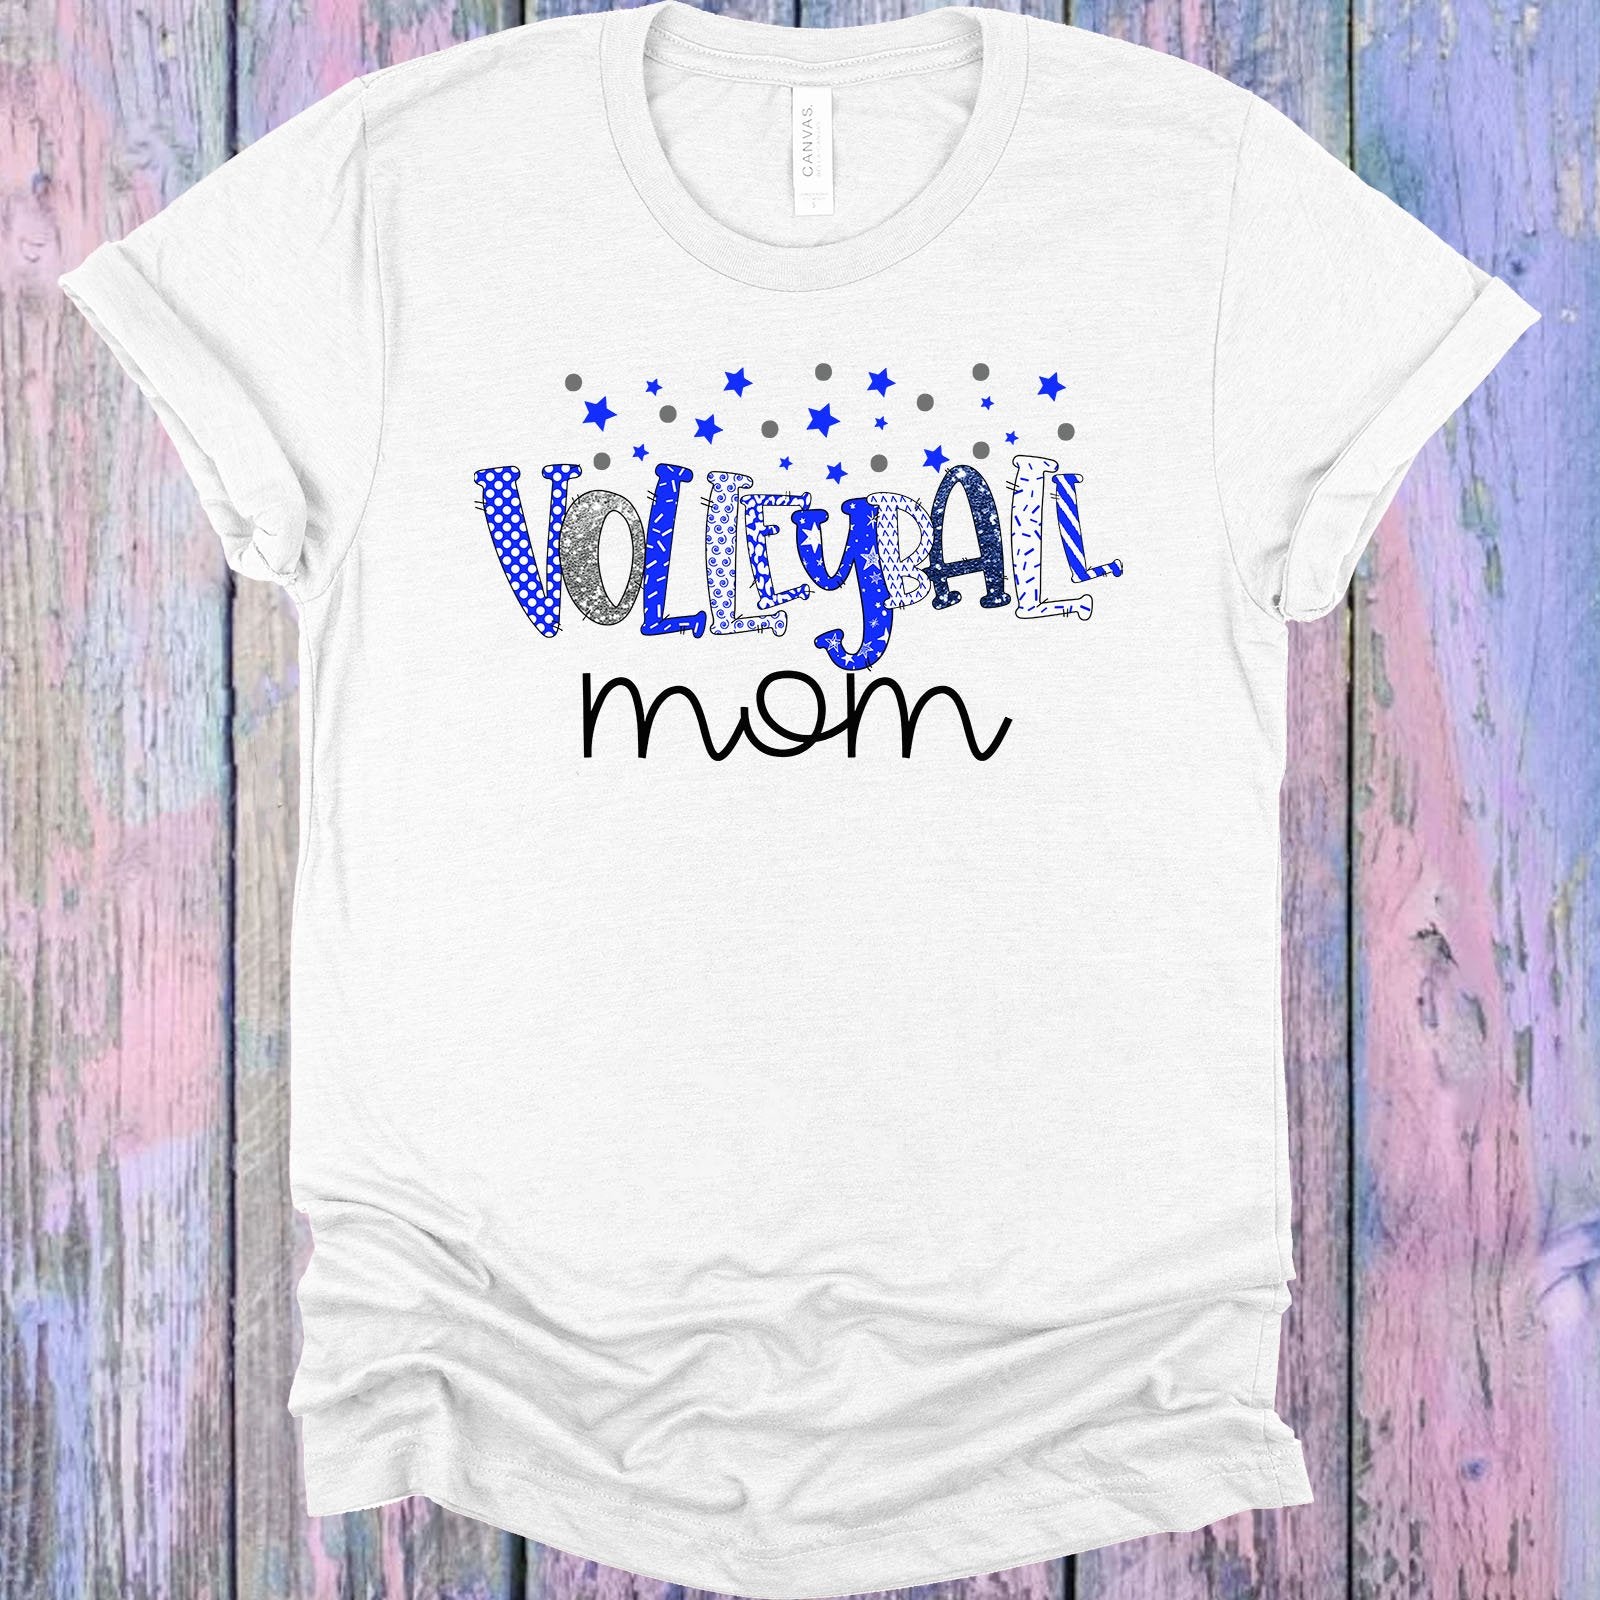 Volleyball Mom Graphic Tee Graphic Tee